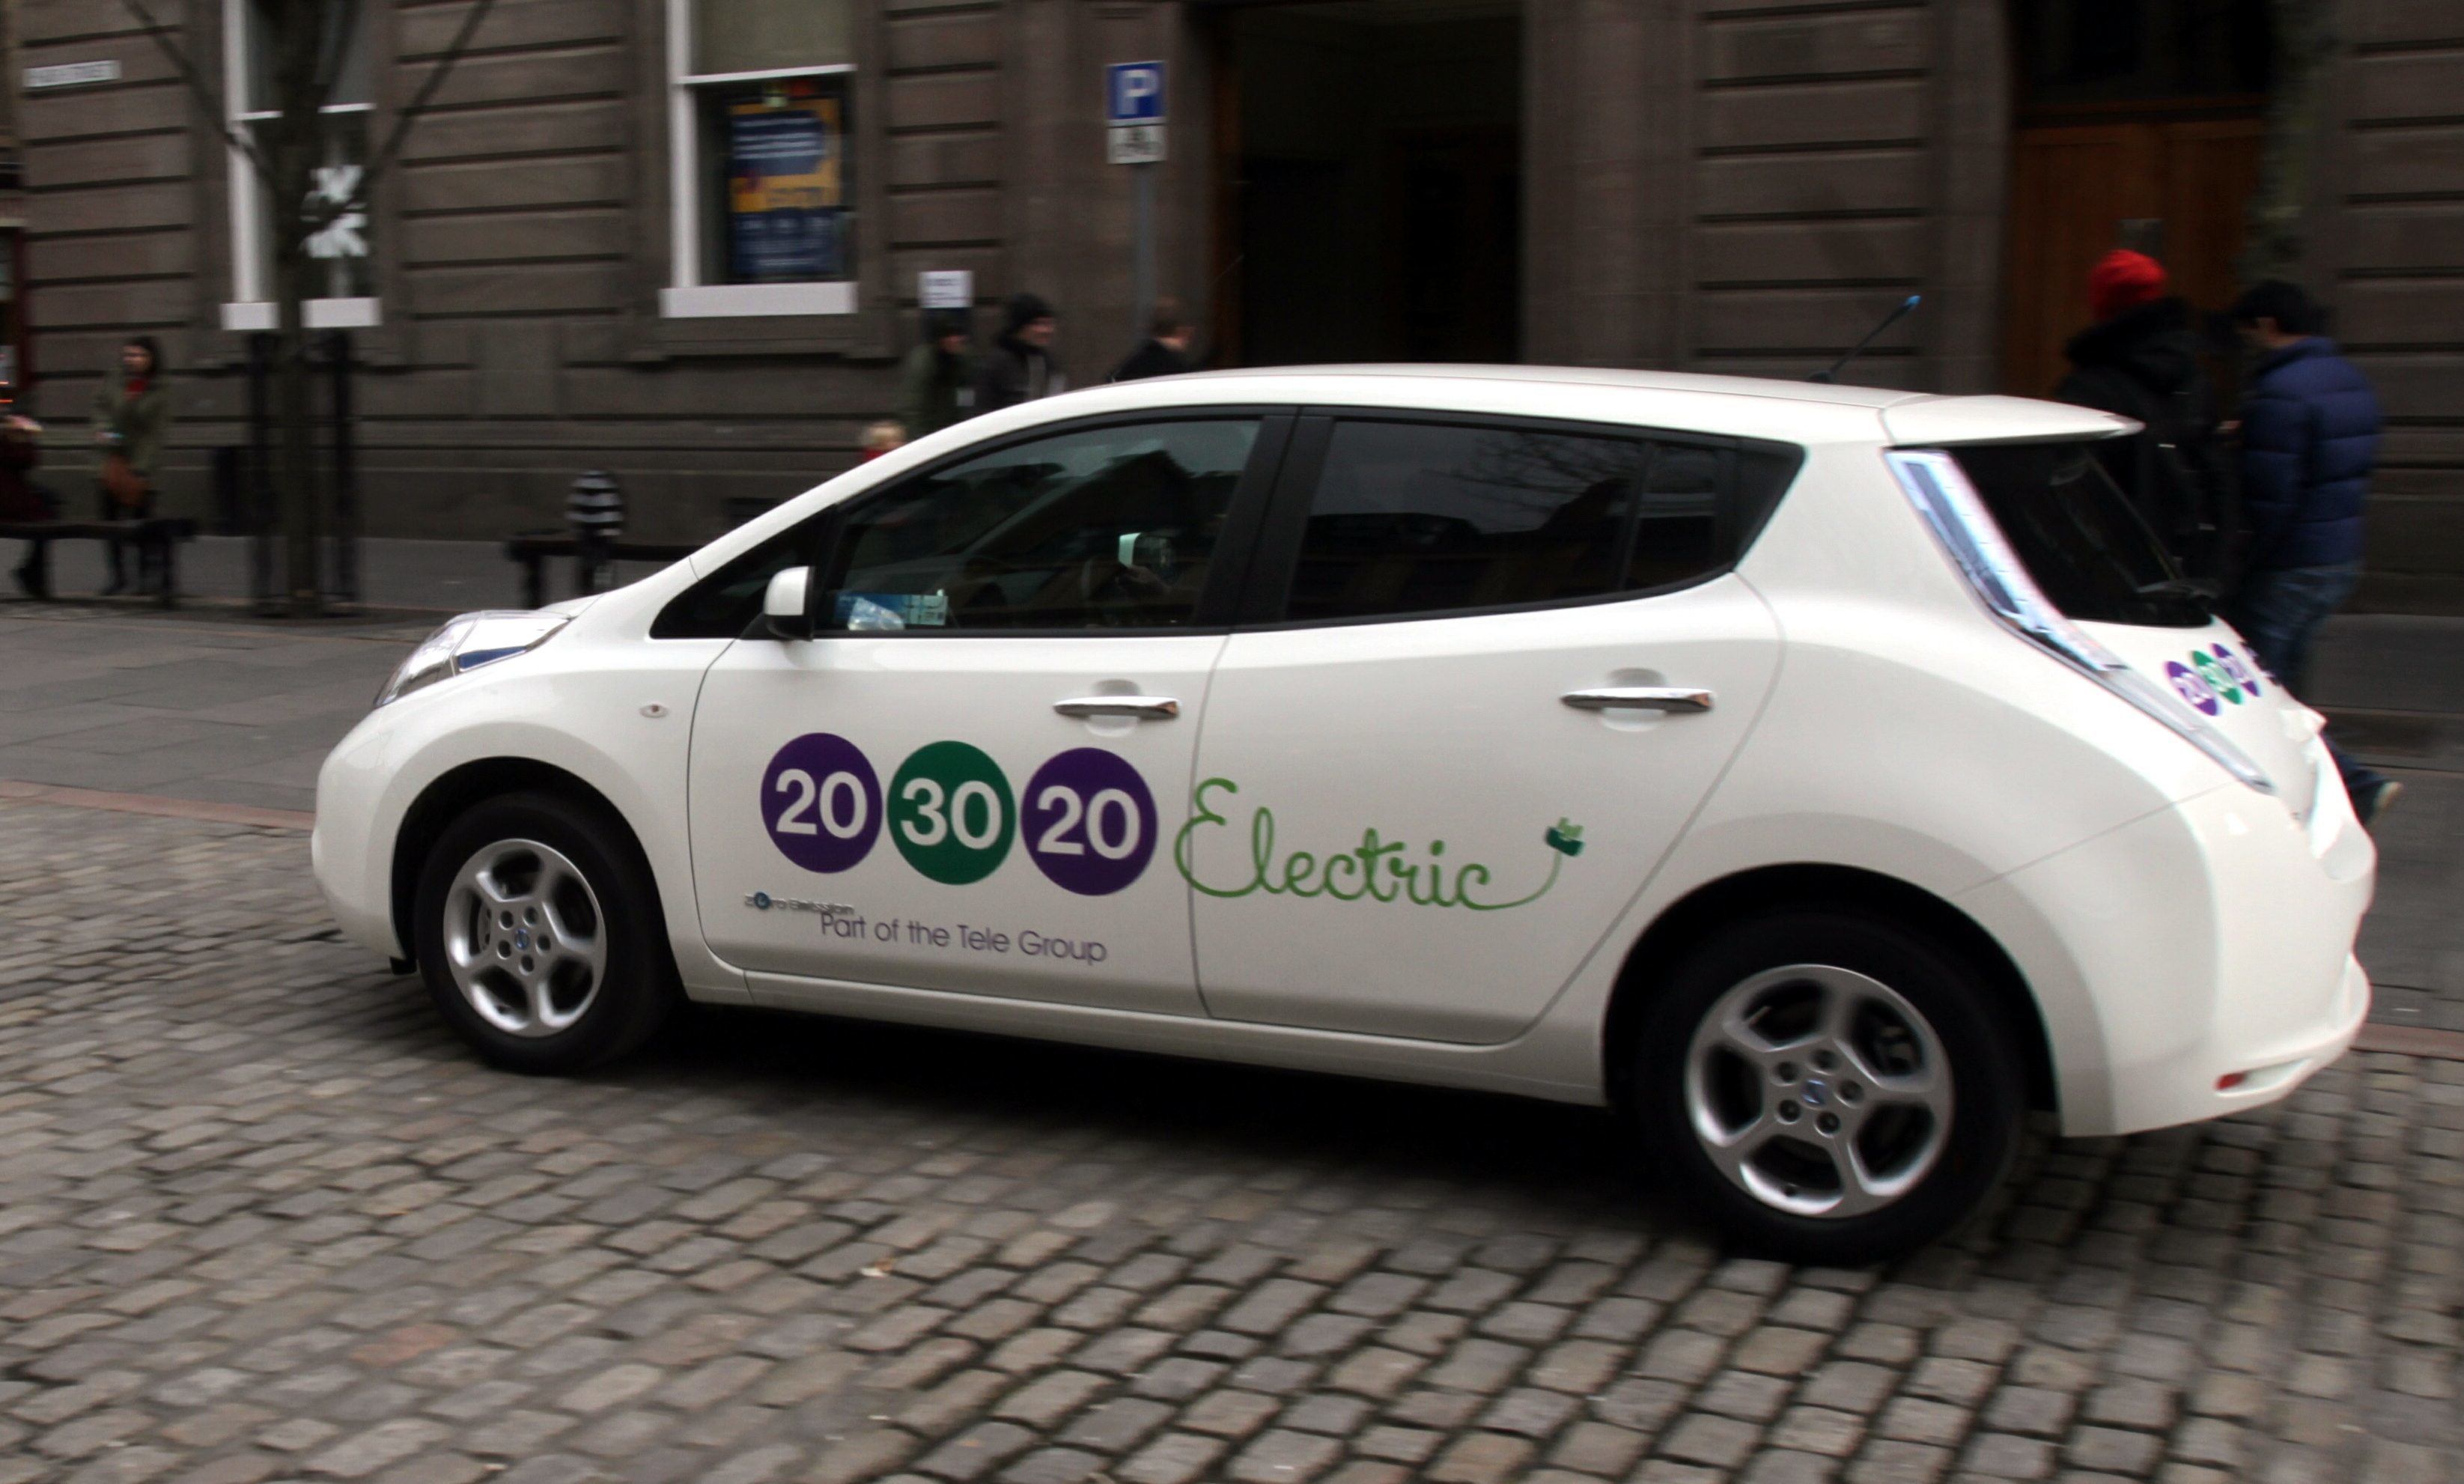 Dundee taxi firm now making drivers pay to charge their electric cars